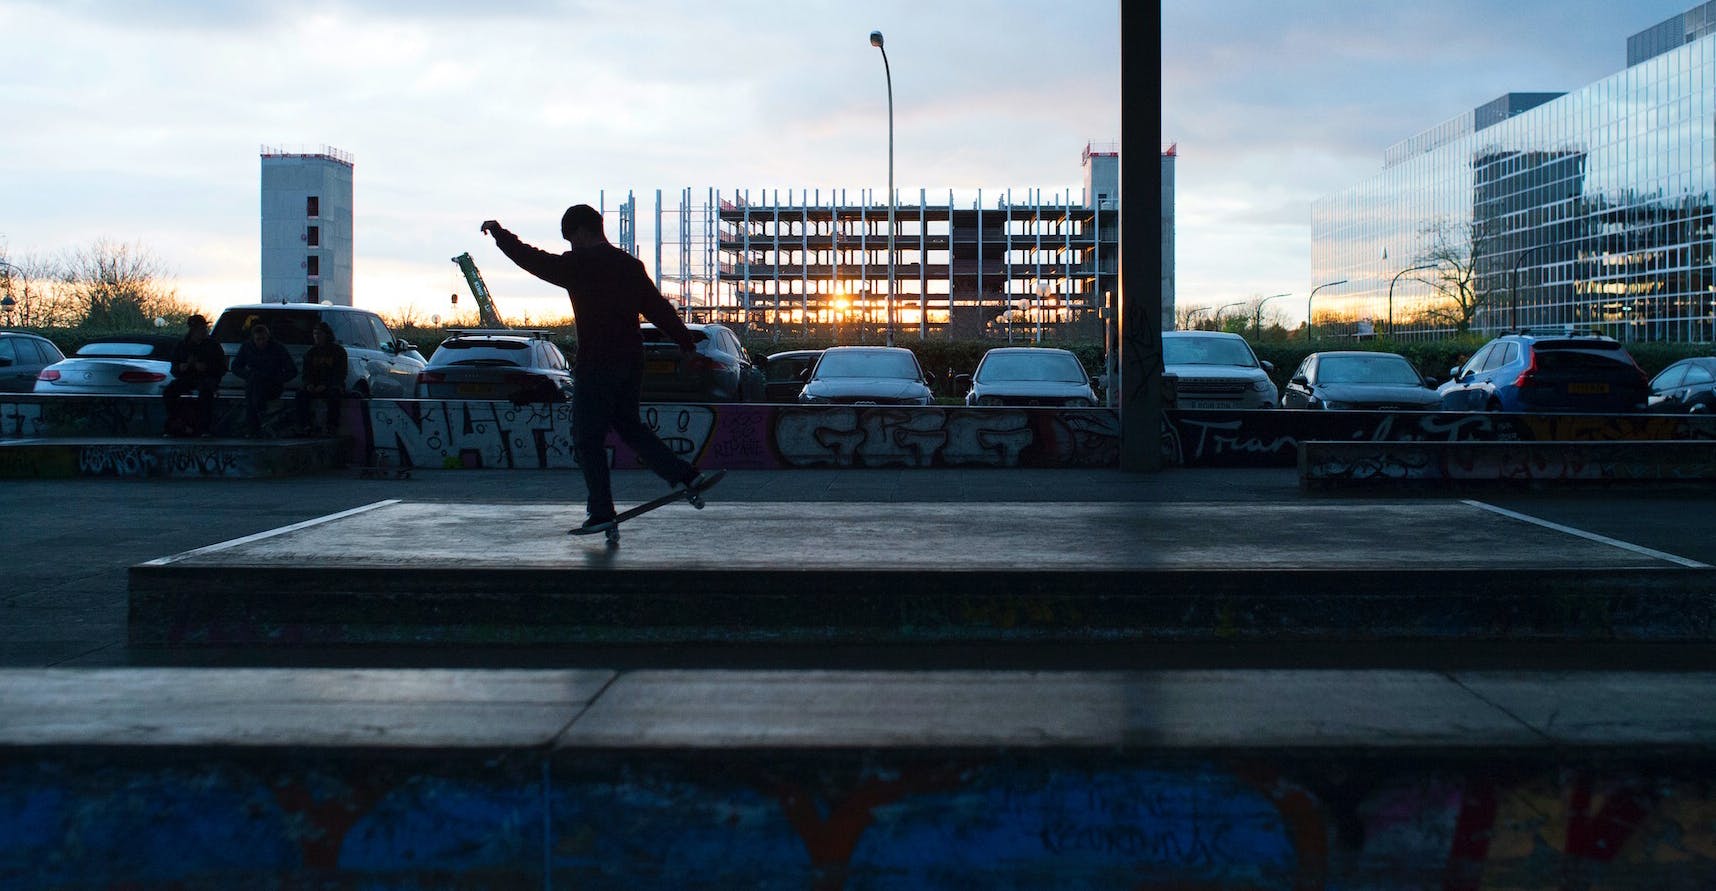 Image of Alex (skateboarder) silhouette at sunset in the city